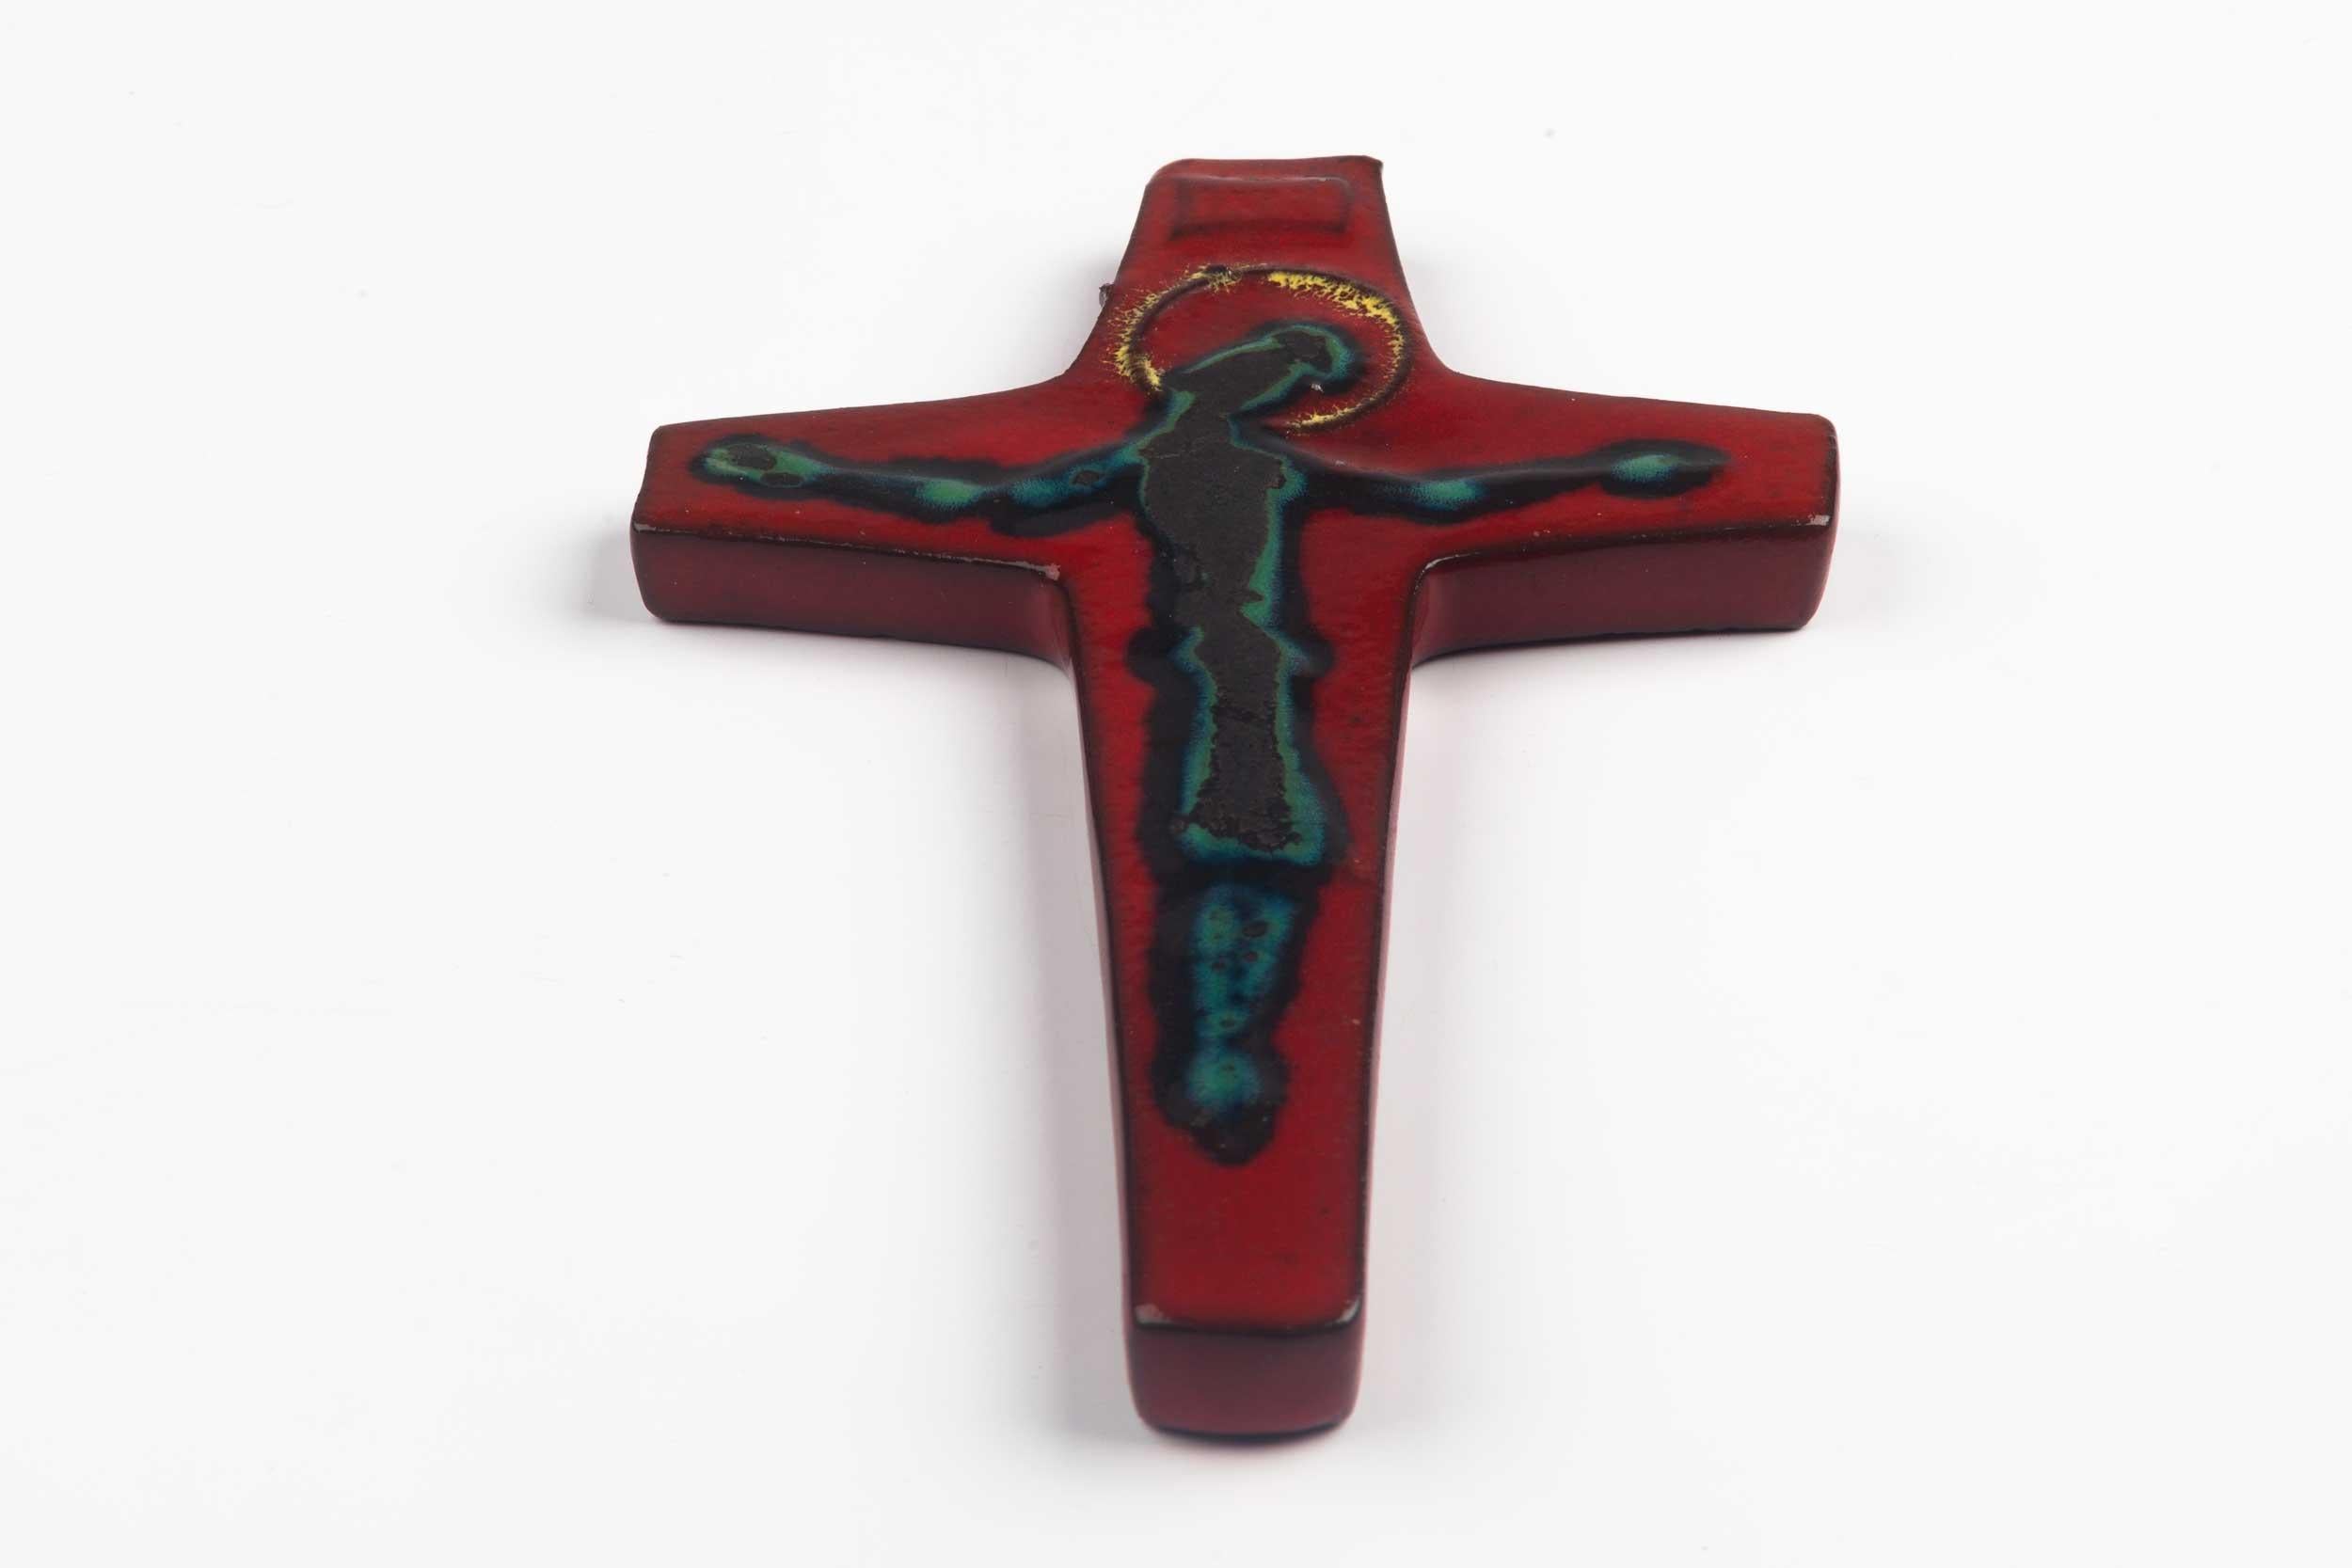 Midcentury European wall cross in glazed, hand painted ceramic. Astounding colors, burgundy, blue, black and gold. From a large collection of vintage crosses handmade by Flemish artisans. 

From modernism to brutalism, the crosses in our